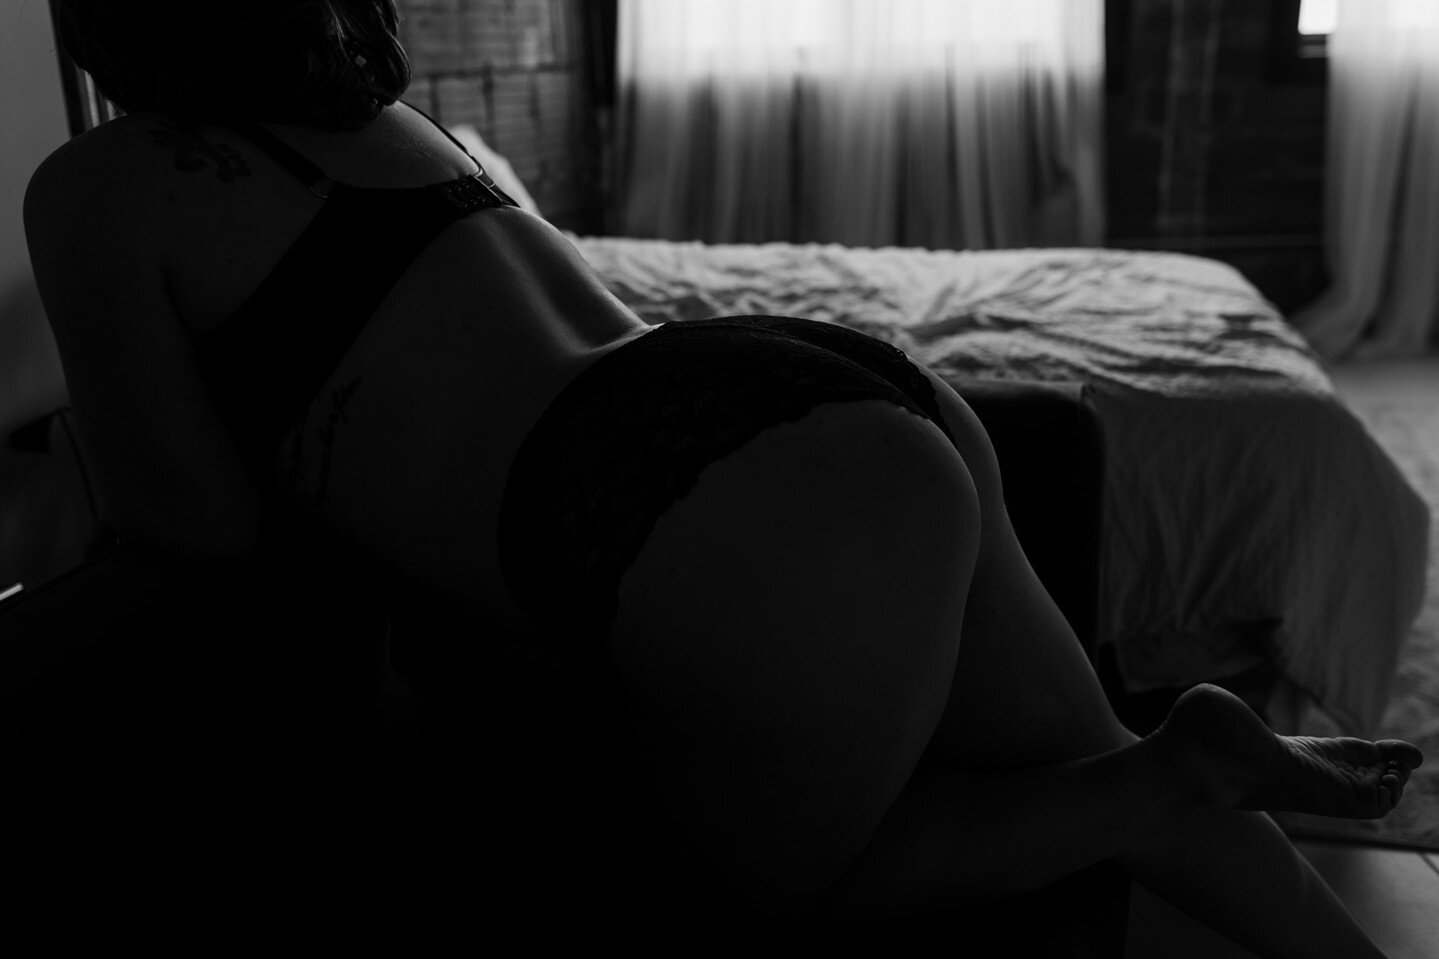 🤍 Tushy Tuesday!⁠
⁠
Want to learn what the Boudoir Experience is all about? Head to the highlights in my profile. ⬆️⁠
⁠
⁠
#lethbridgeboudoirphotographer #lethbridgeboudoirphotography #albertaphotographer  #boudoirphotography #boudoirphotographer #le